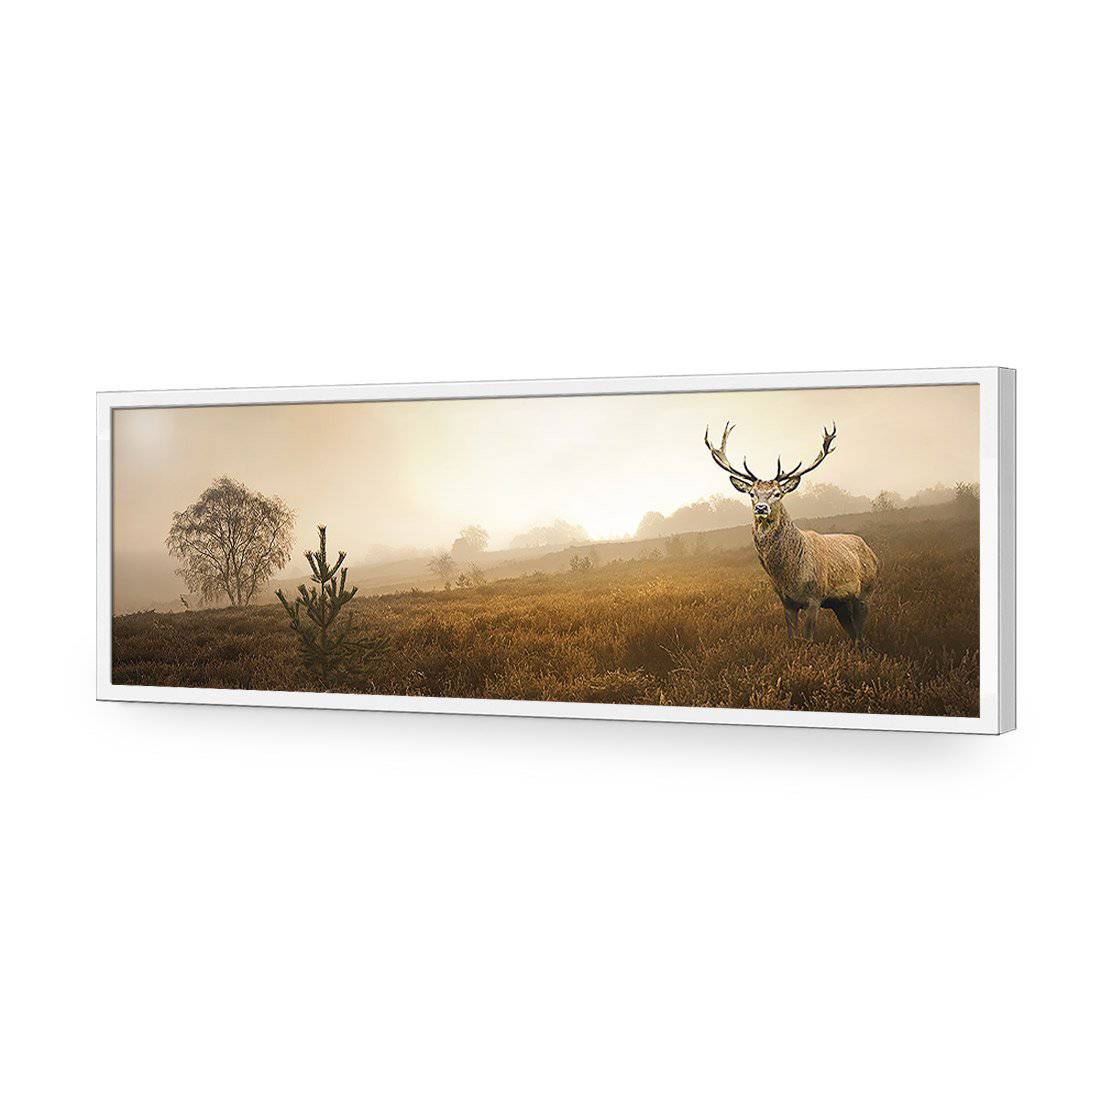 Morning Stag, Long-Acrylic-Wall Art Design-Without Border-Acrylic - White Frame-60x20cm-Wall Art Designs